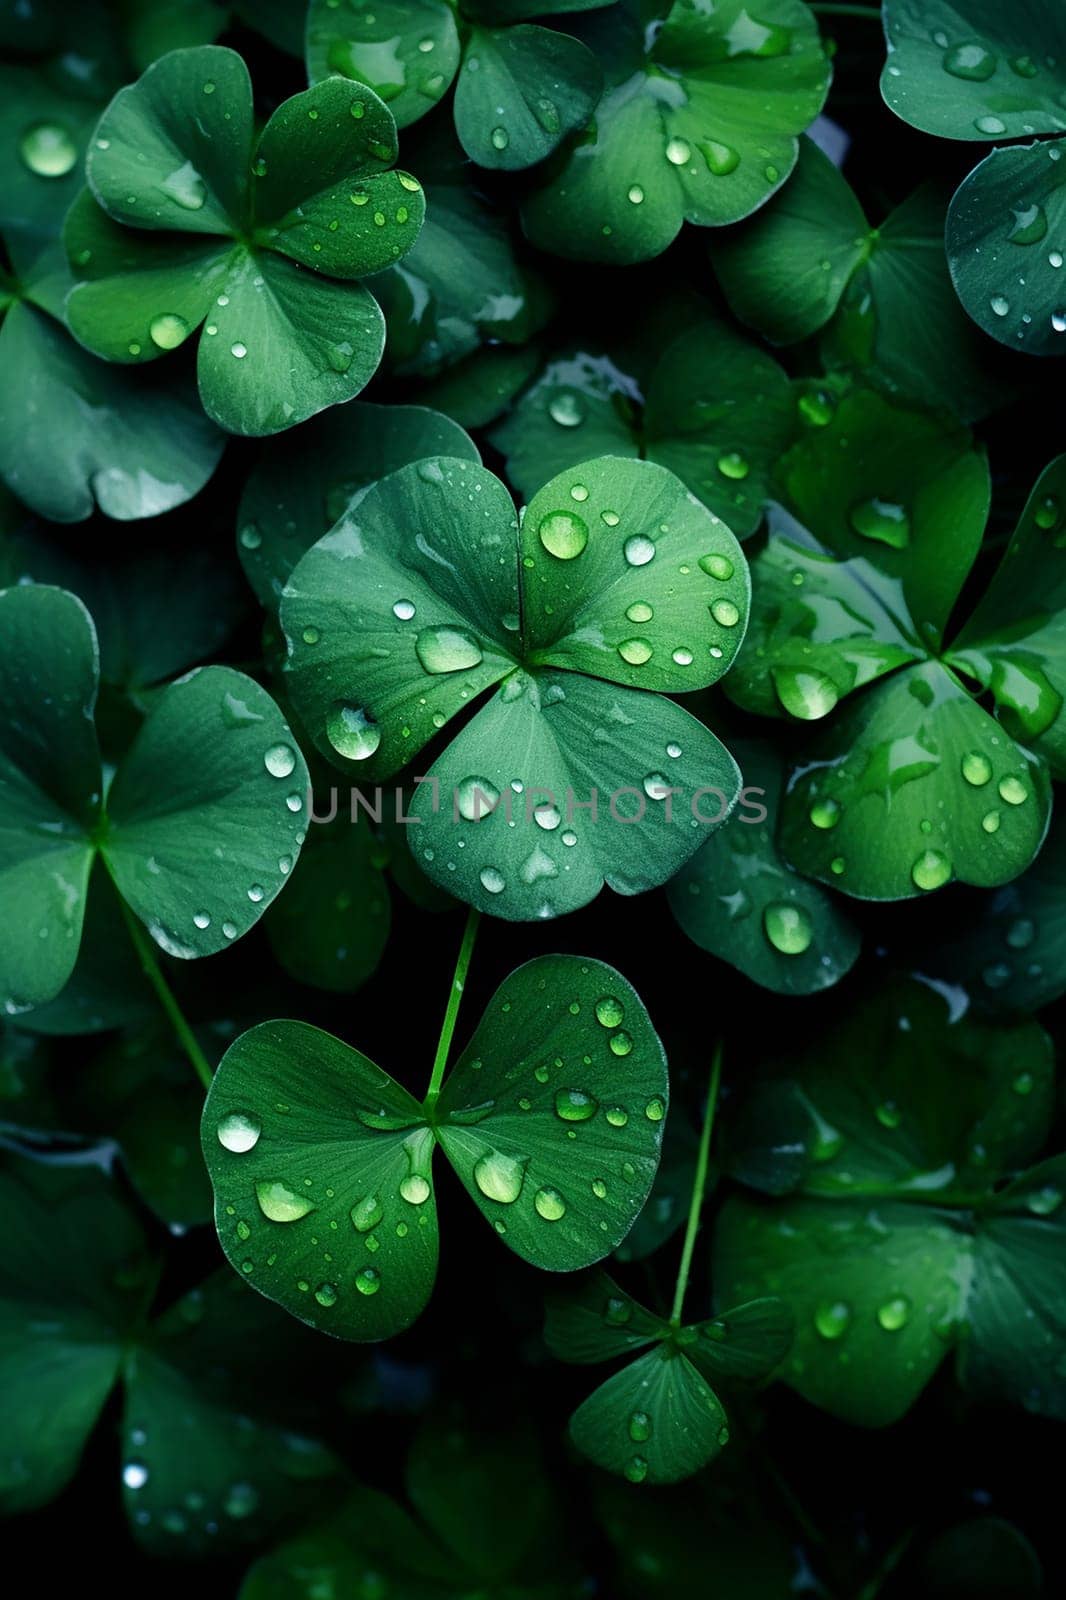 Green clover leaves with water droplets after rain. by Hype2art